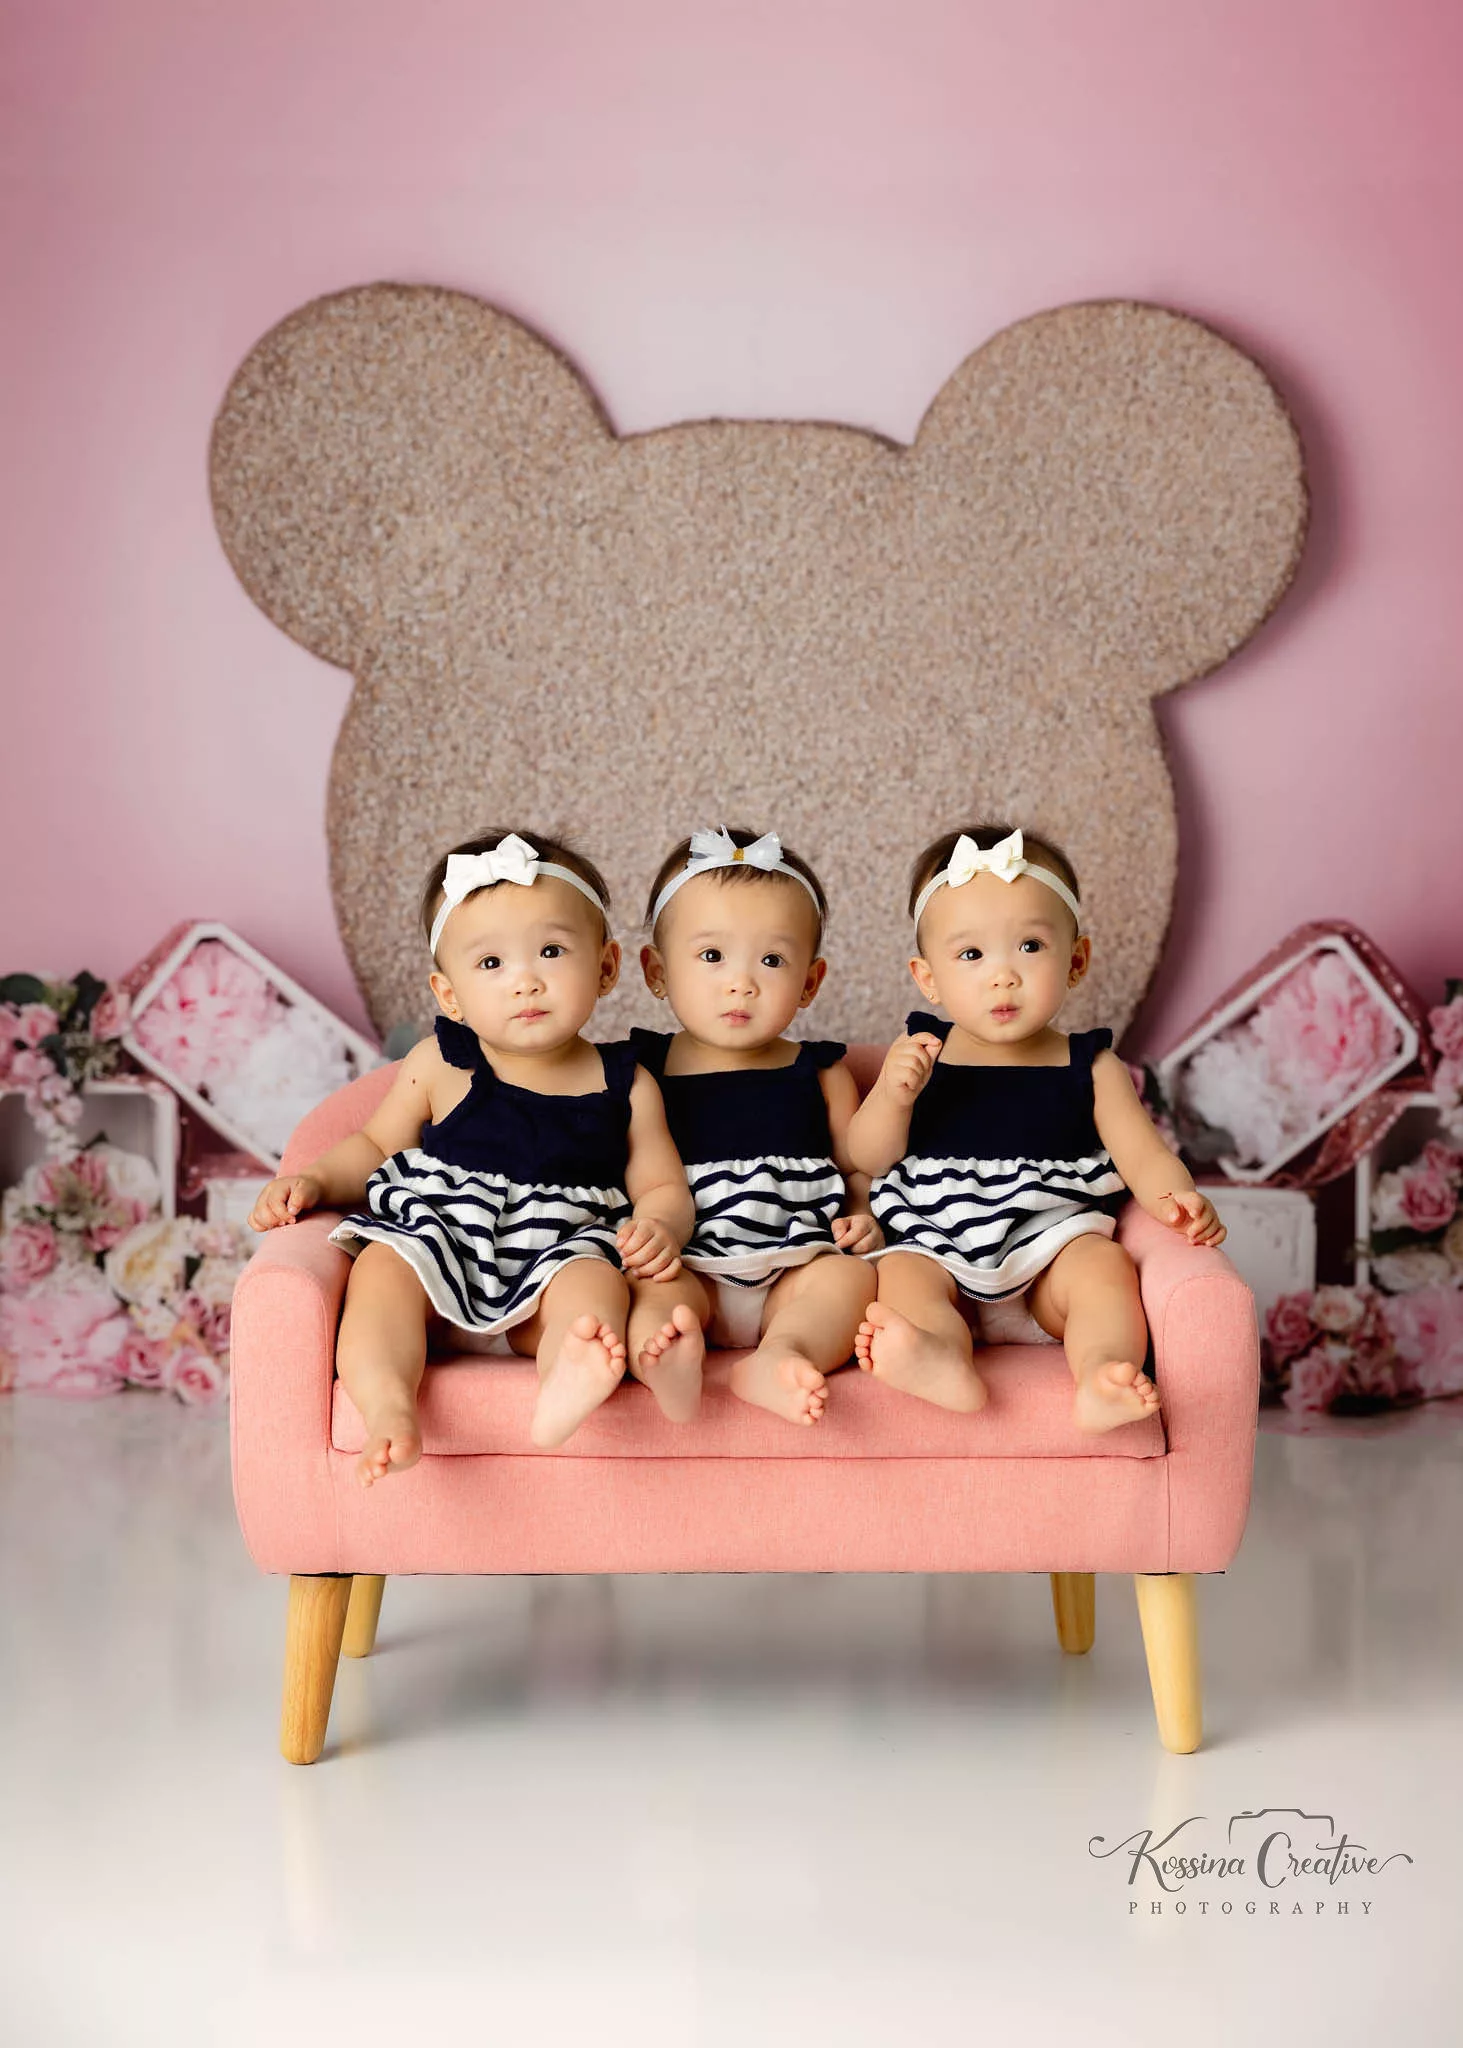 orlando photo studio family photographer studio portraits generations triplets mickey minnie mouse gold pink couch